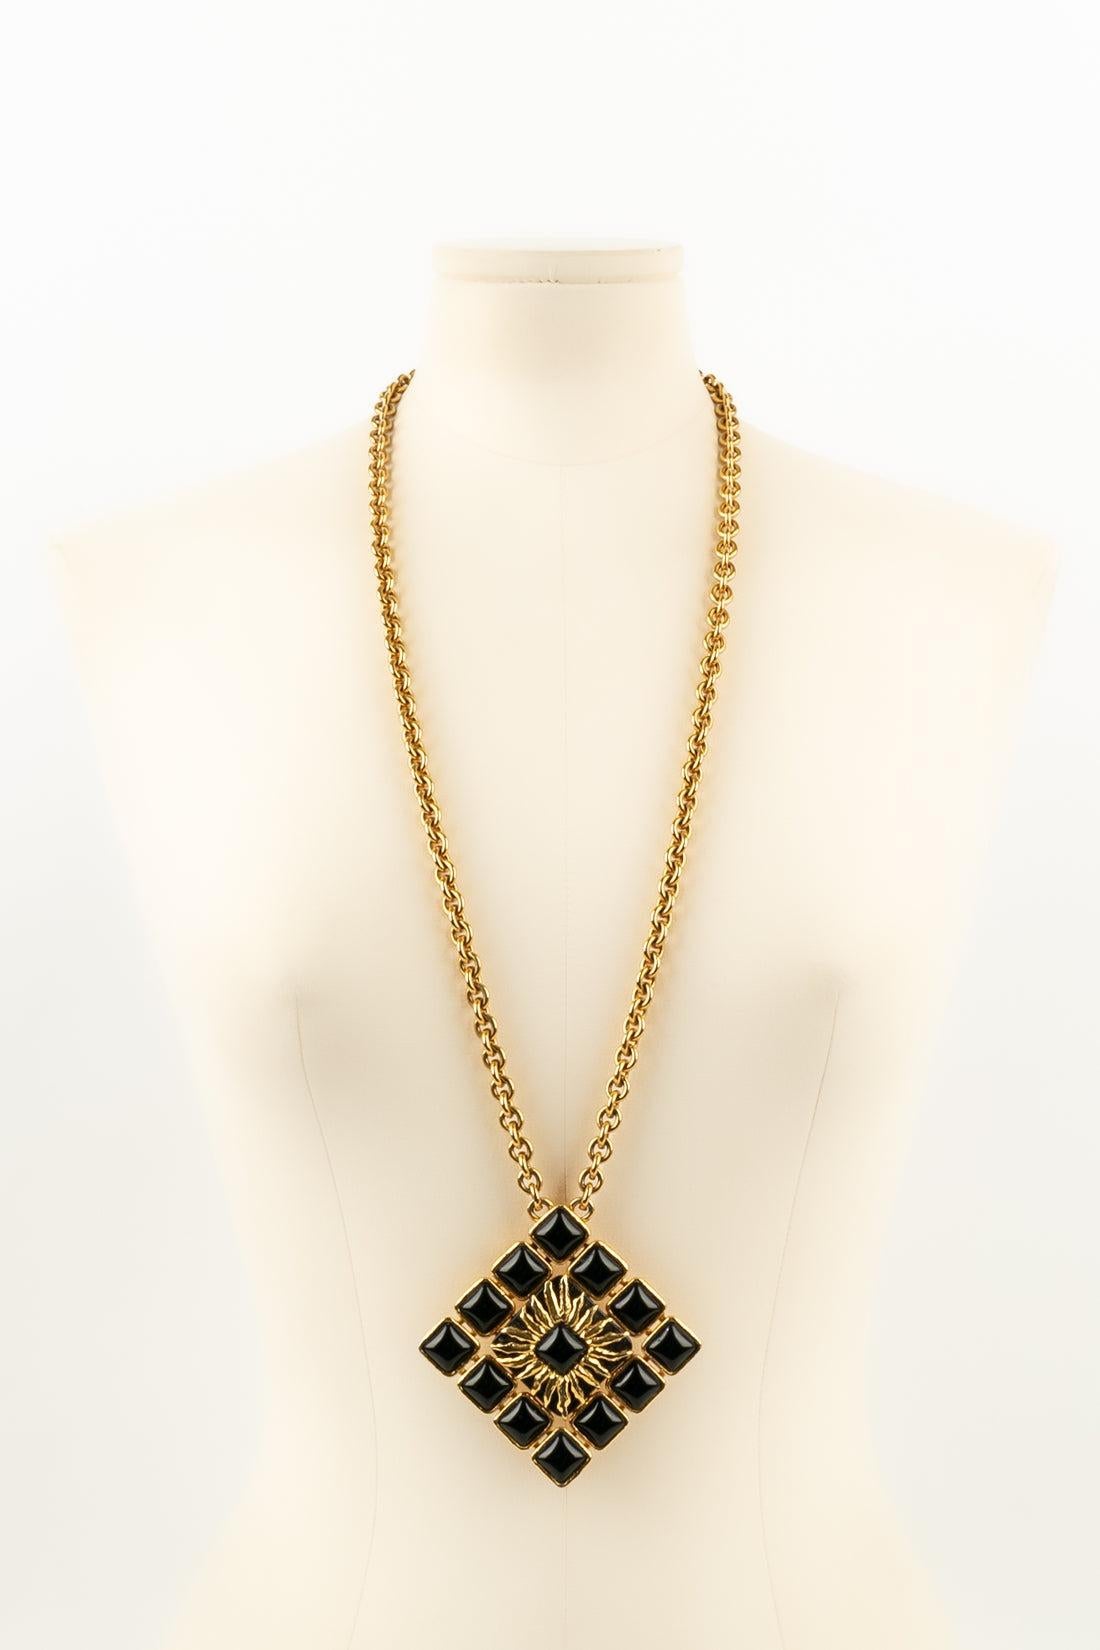 Jean Patou Necklace in Gold-Plated Metal and Black Glass Paste For Sale 1